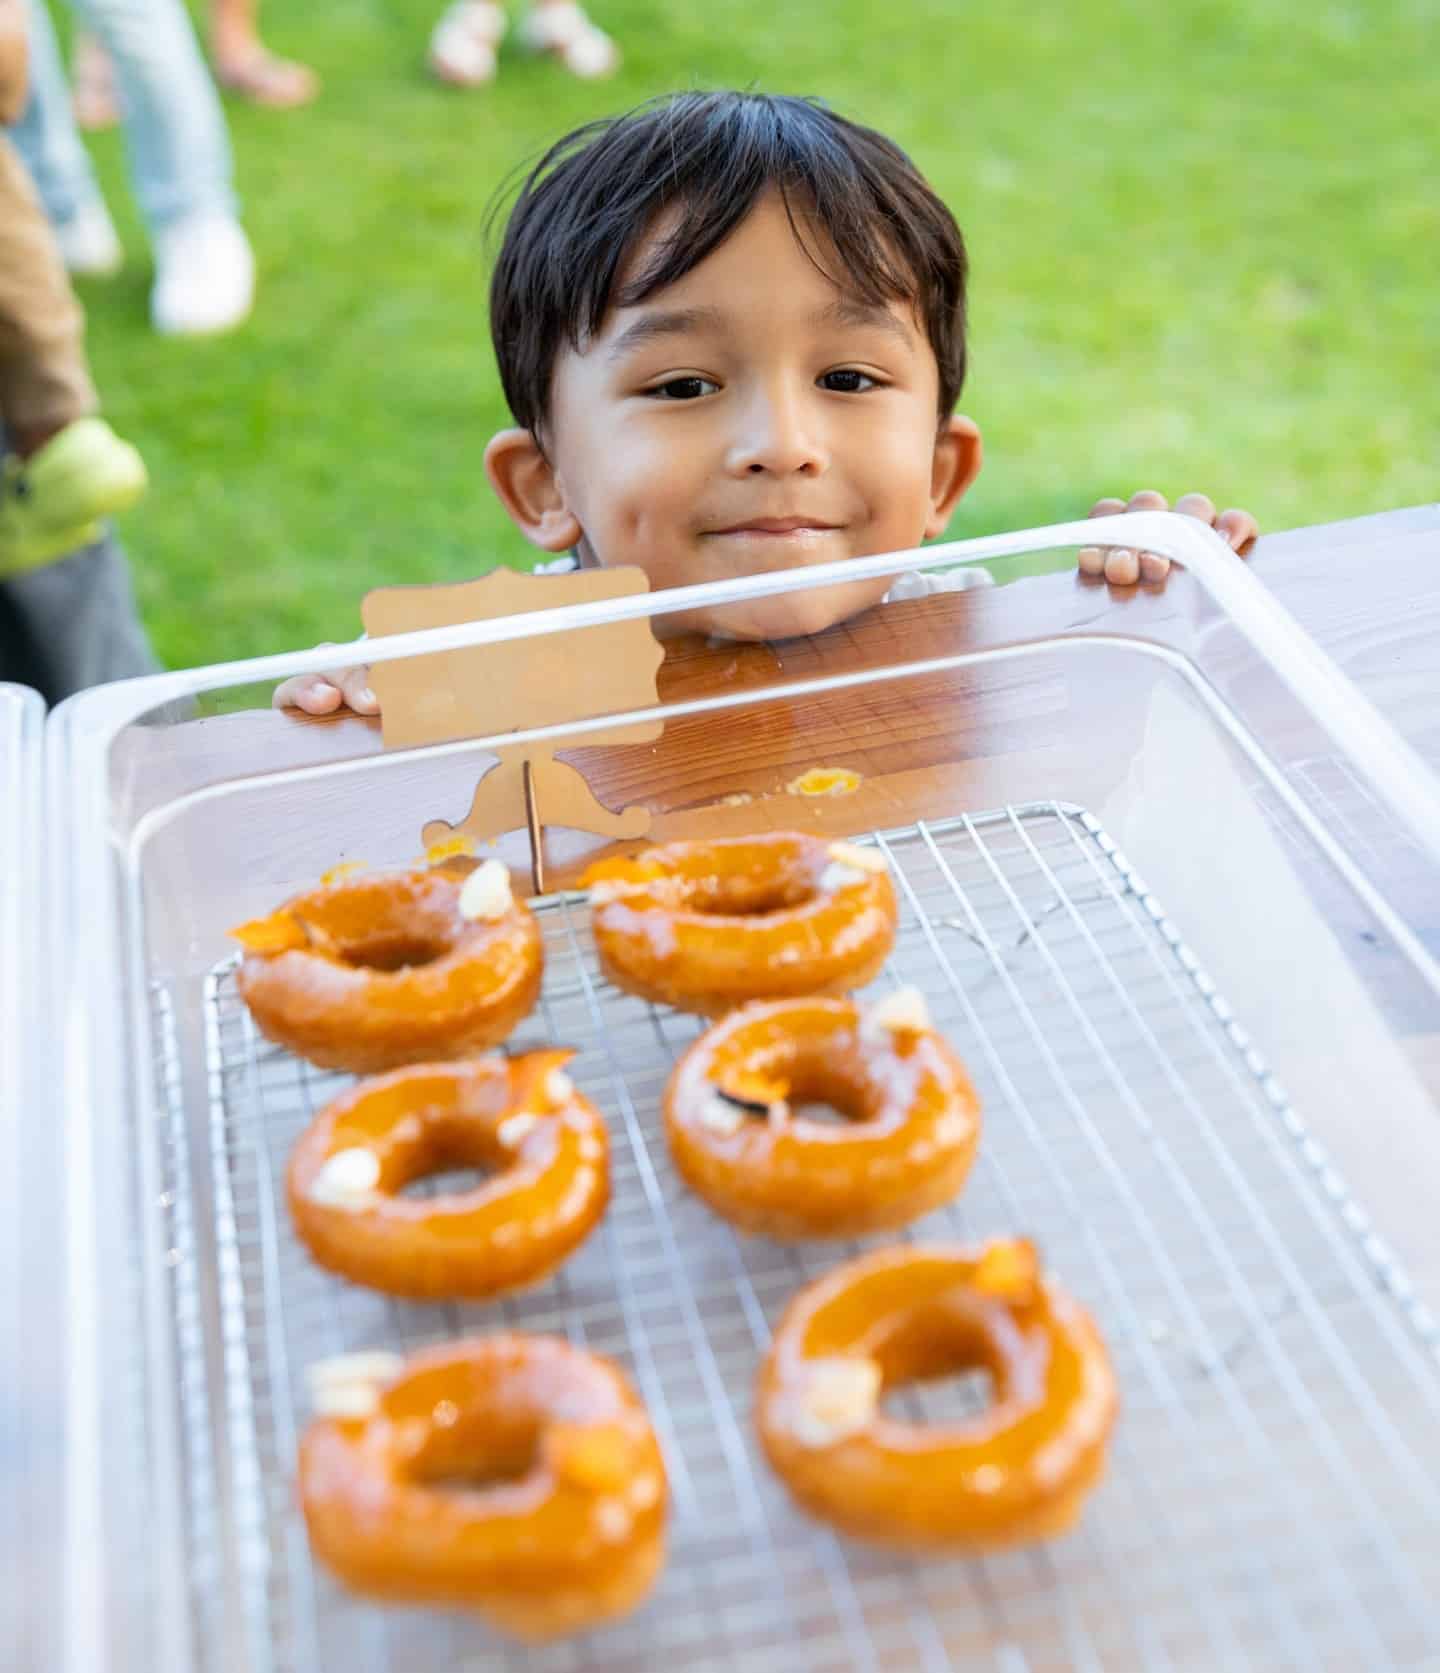 Treat yourself to a complimentary donut from @holeygraildonuts at our next First Saturday celebration. Stop by the Ward Centre Courtyard on May 6 starting at 1pm, while supplies last.